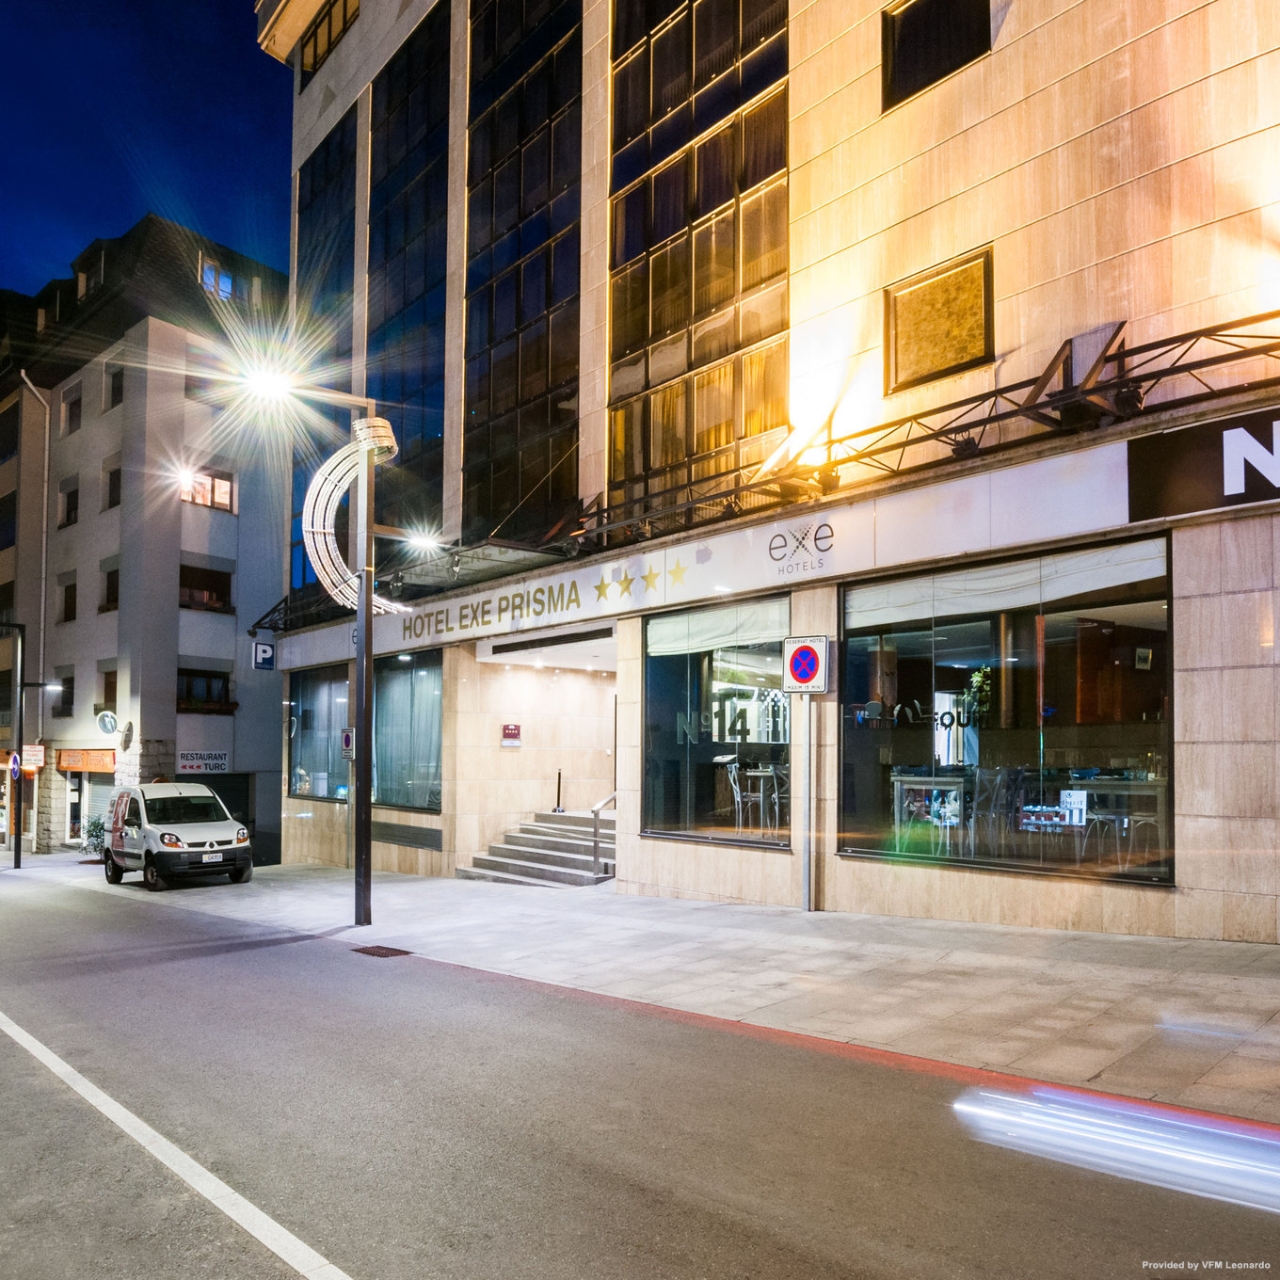 Hotel Exe Prisma - Les Escaldes-Engordany at HRS with free services